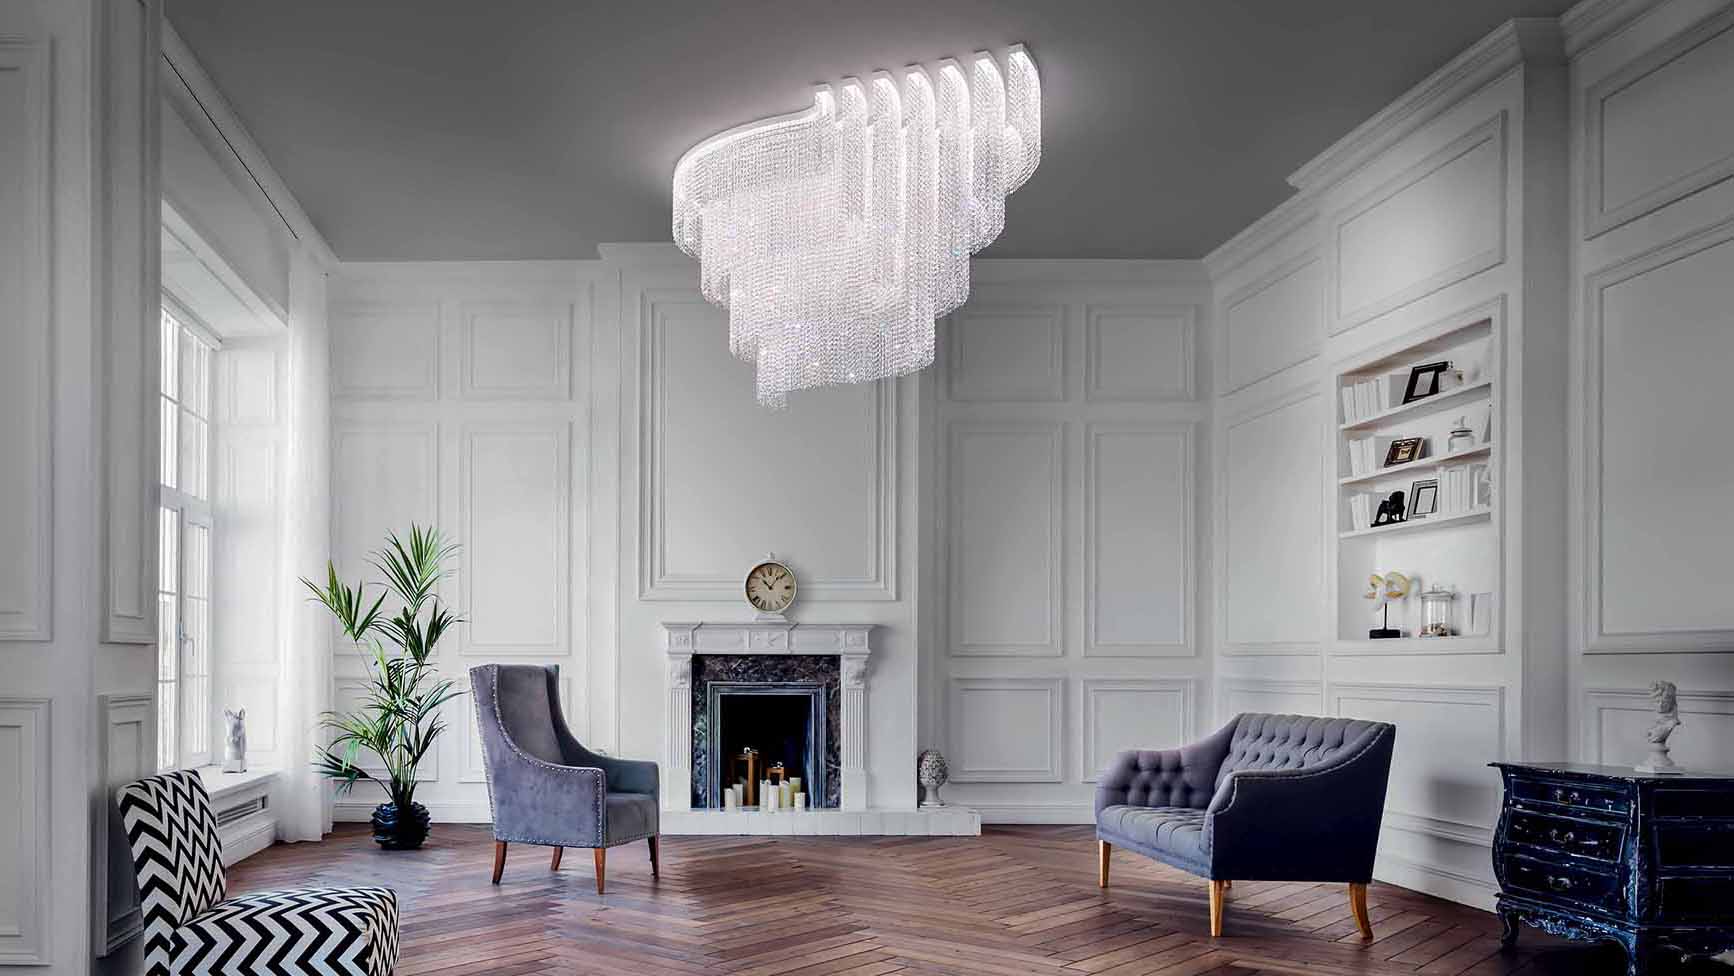 Buy 8Inch Square White Crystal Chandelier for Living Room Modern Ceiling  Light for Hall Dining Room Led Fixtures Hanging Ring Pendent lw4 Online at  Low Prices in India - Amazon.in